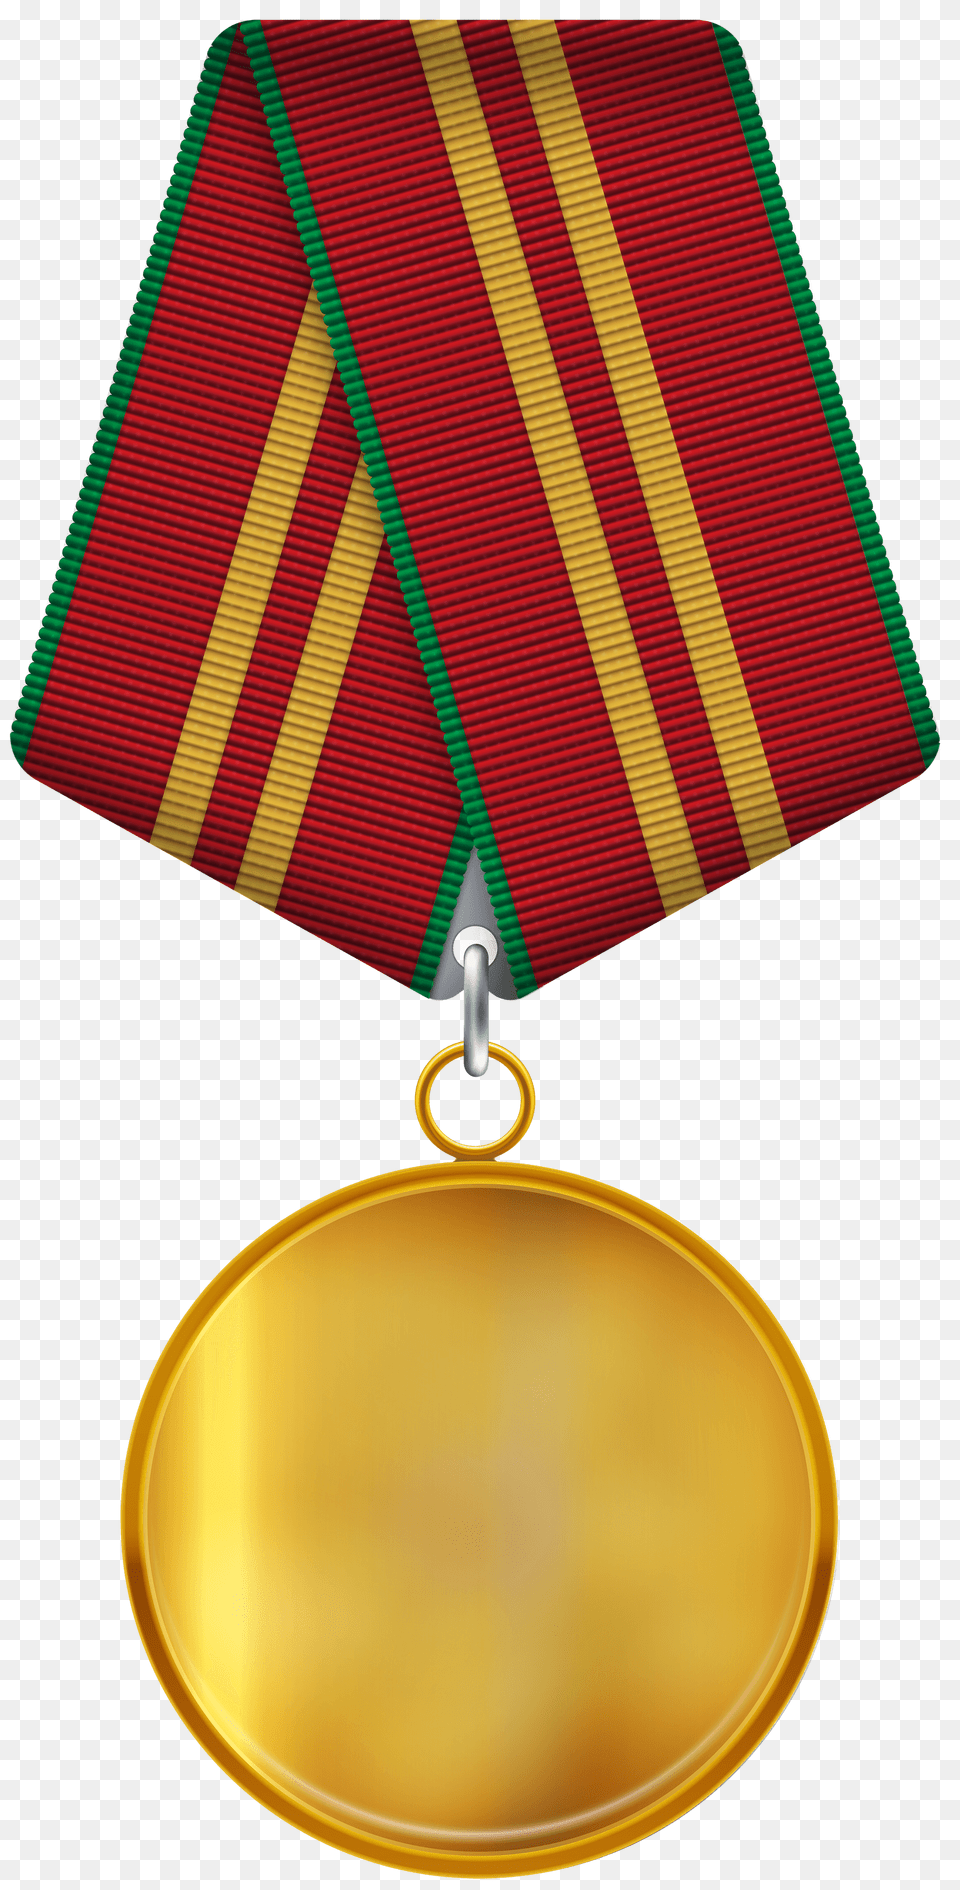 Gold Ribbon Blank, Gold Medal, Trophy, Accessories, Jewelry Png